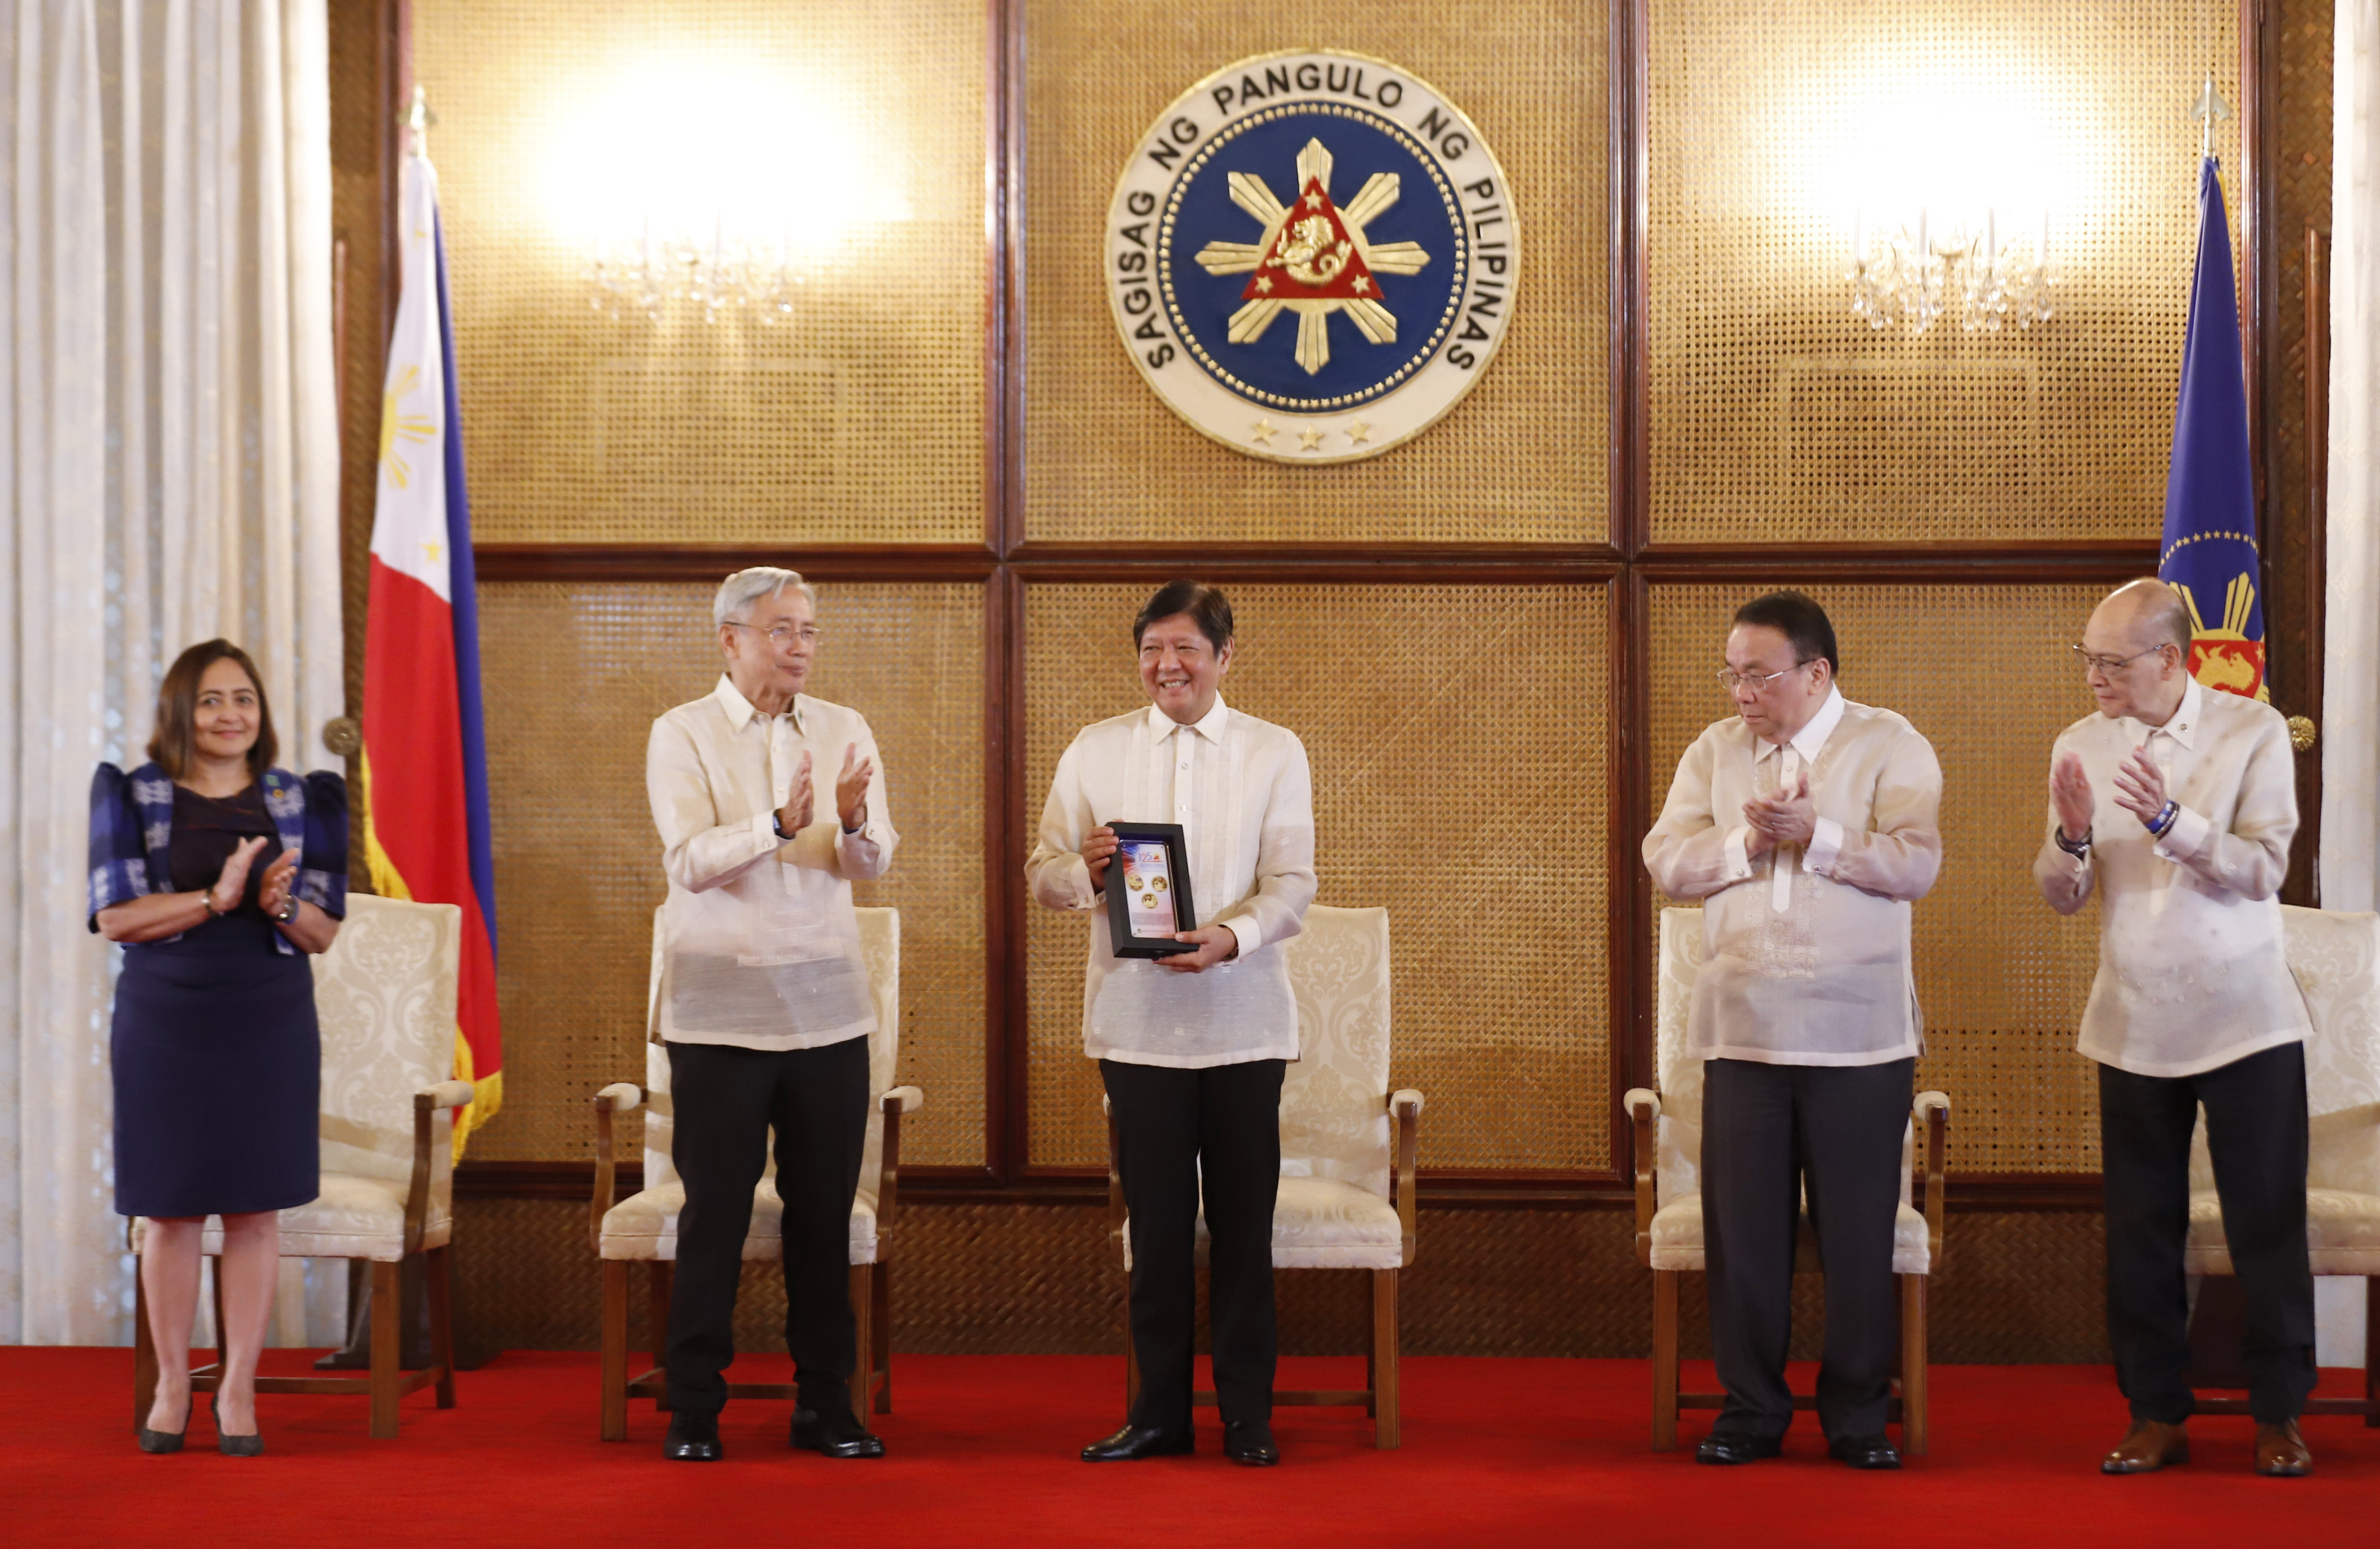 Launch of the commemorative coin set for the 125th Anniversary of Philippines Independence